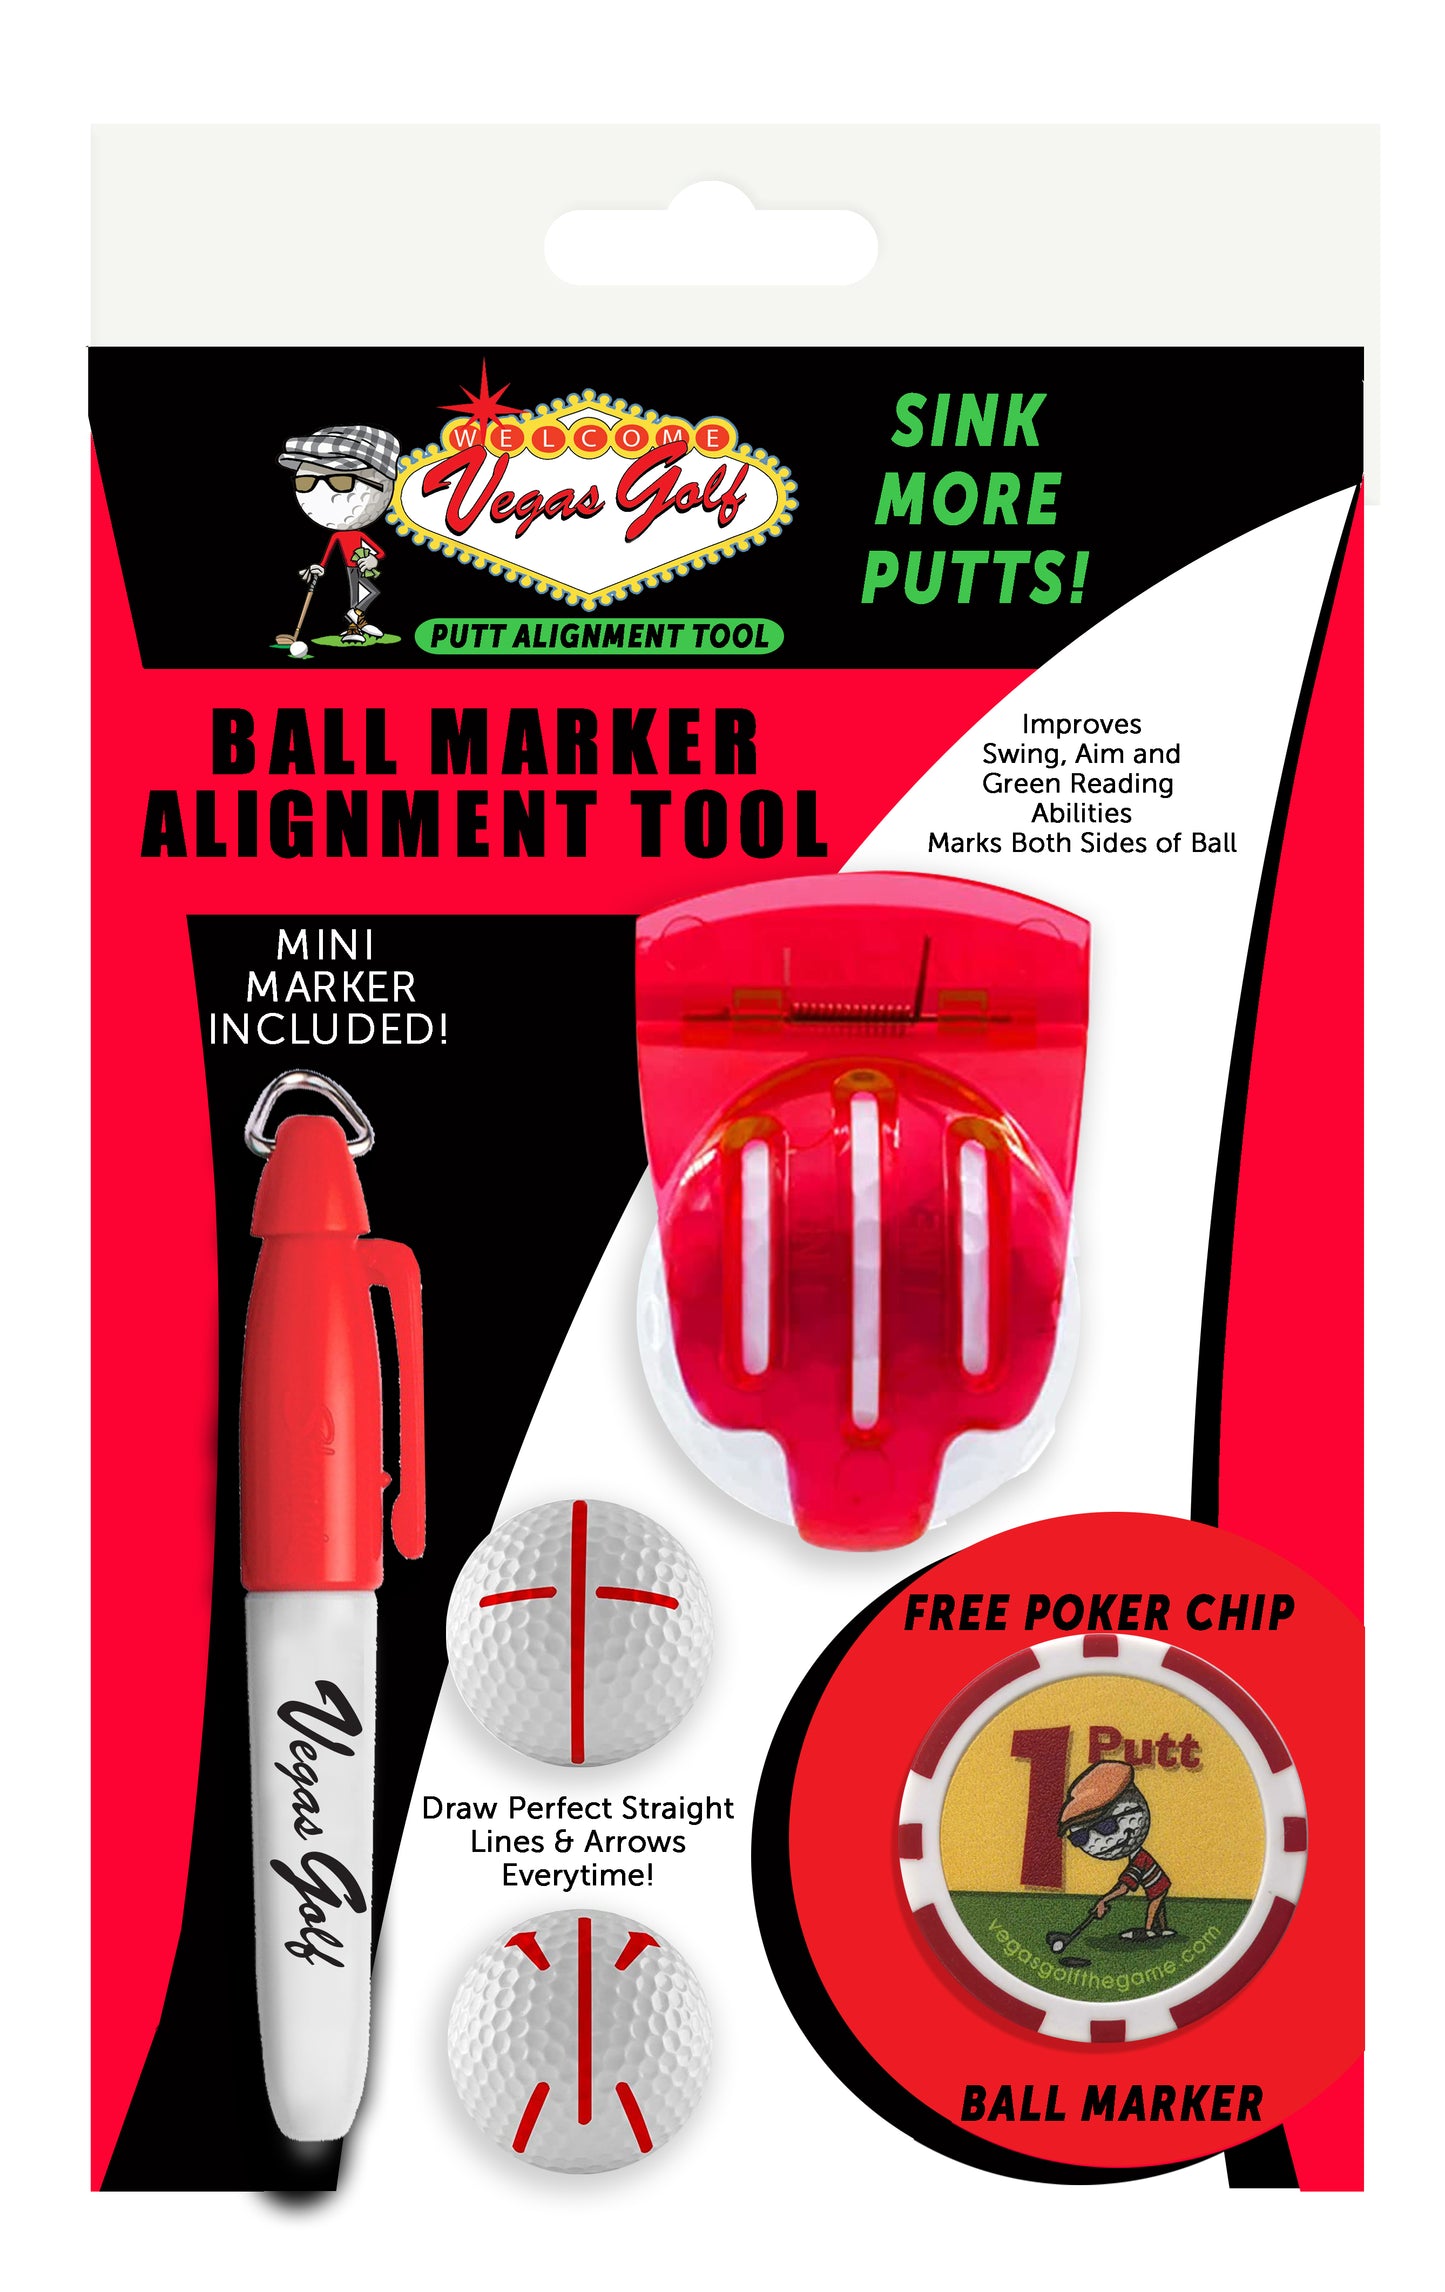 Coming Soon! Ball Alignment Tool